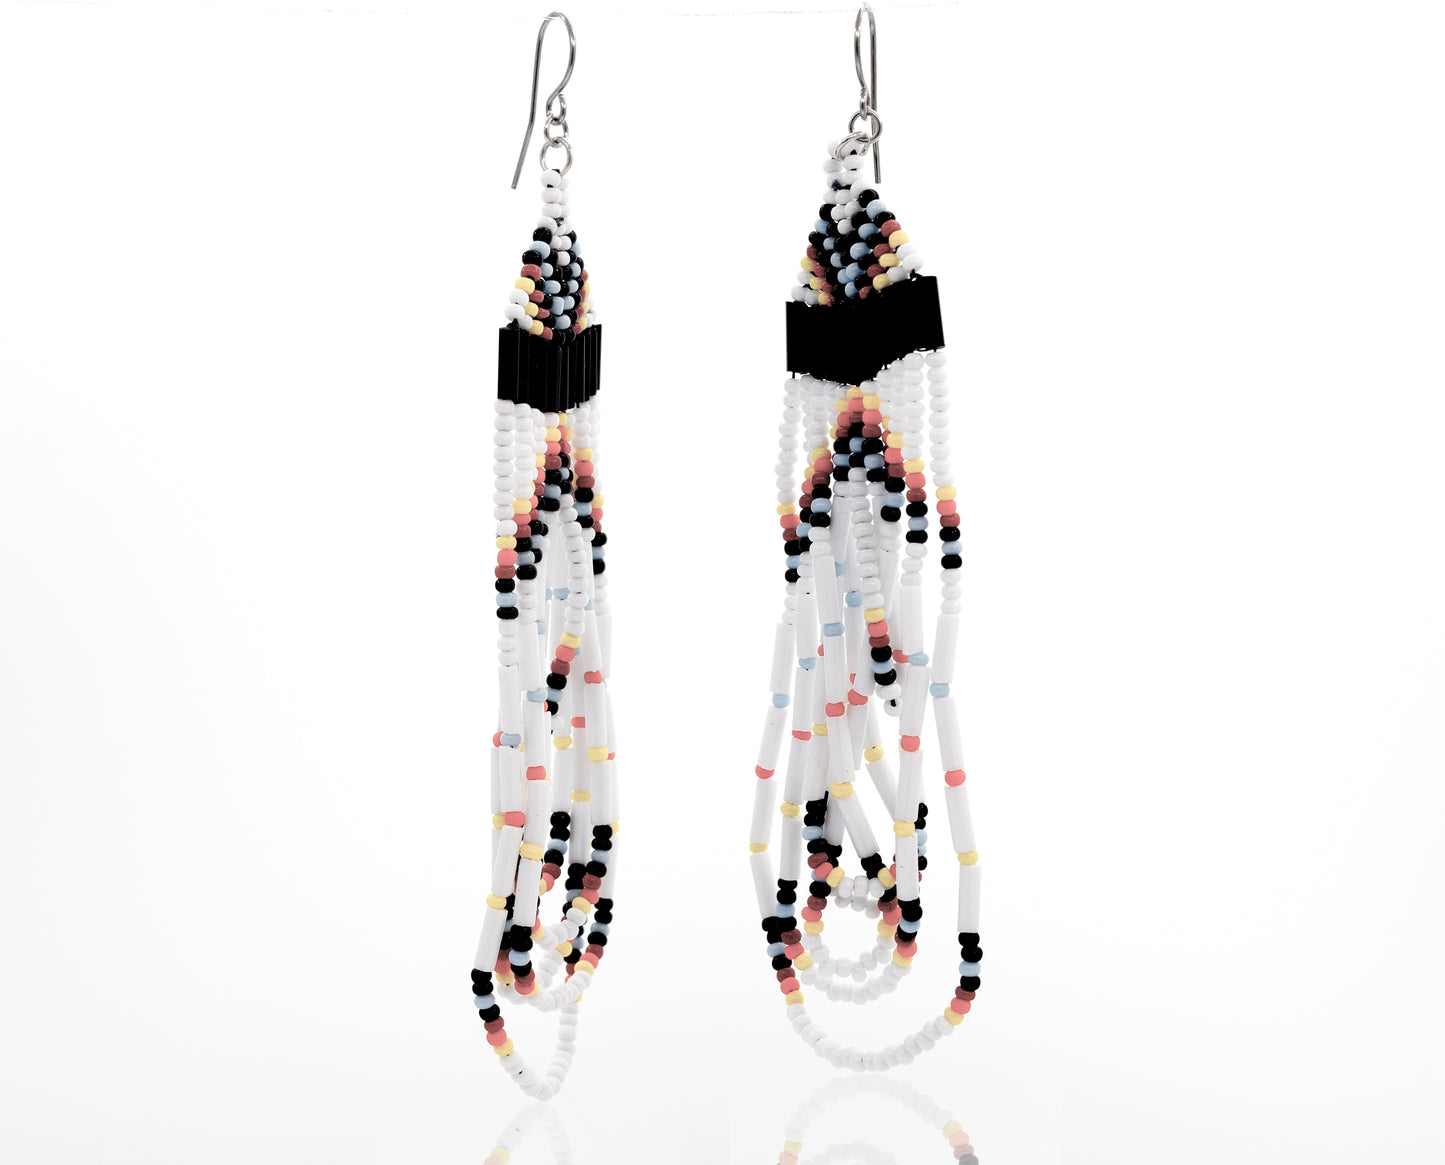 
                  
                    A pair of Super Silver Handmade Multi-Stone Beaded Dangle Earrings featuring black and white beads, handmade with surgical steel posts, showcased on a white surface.
                  
                